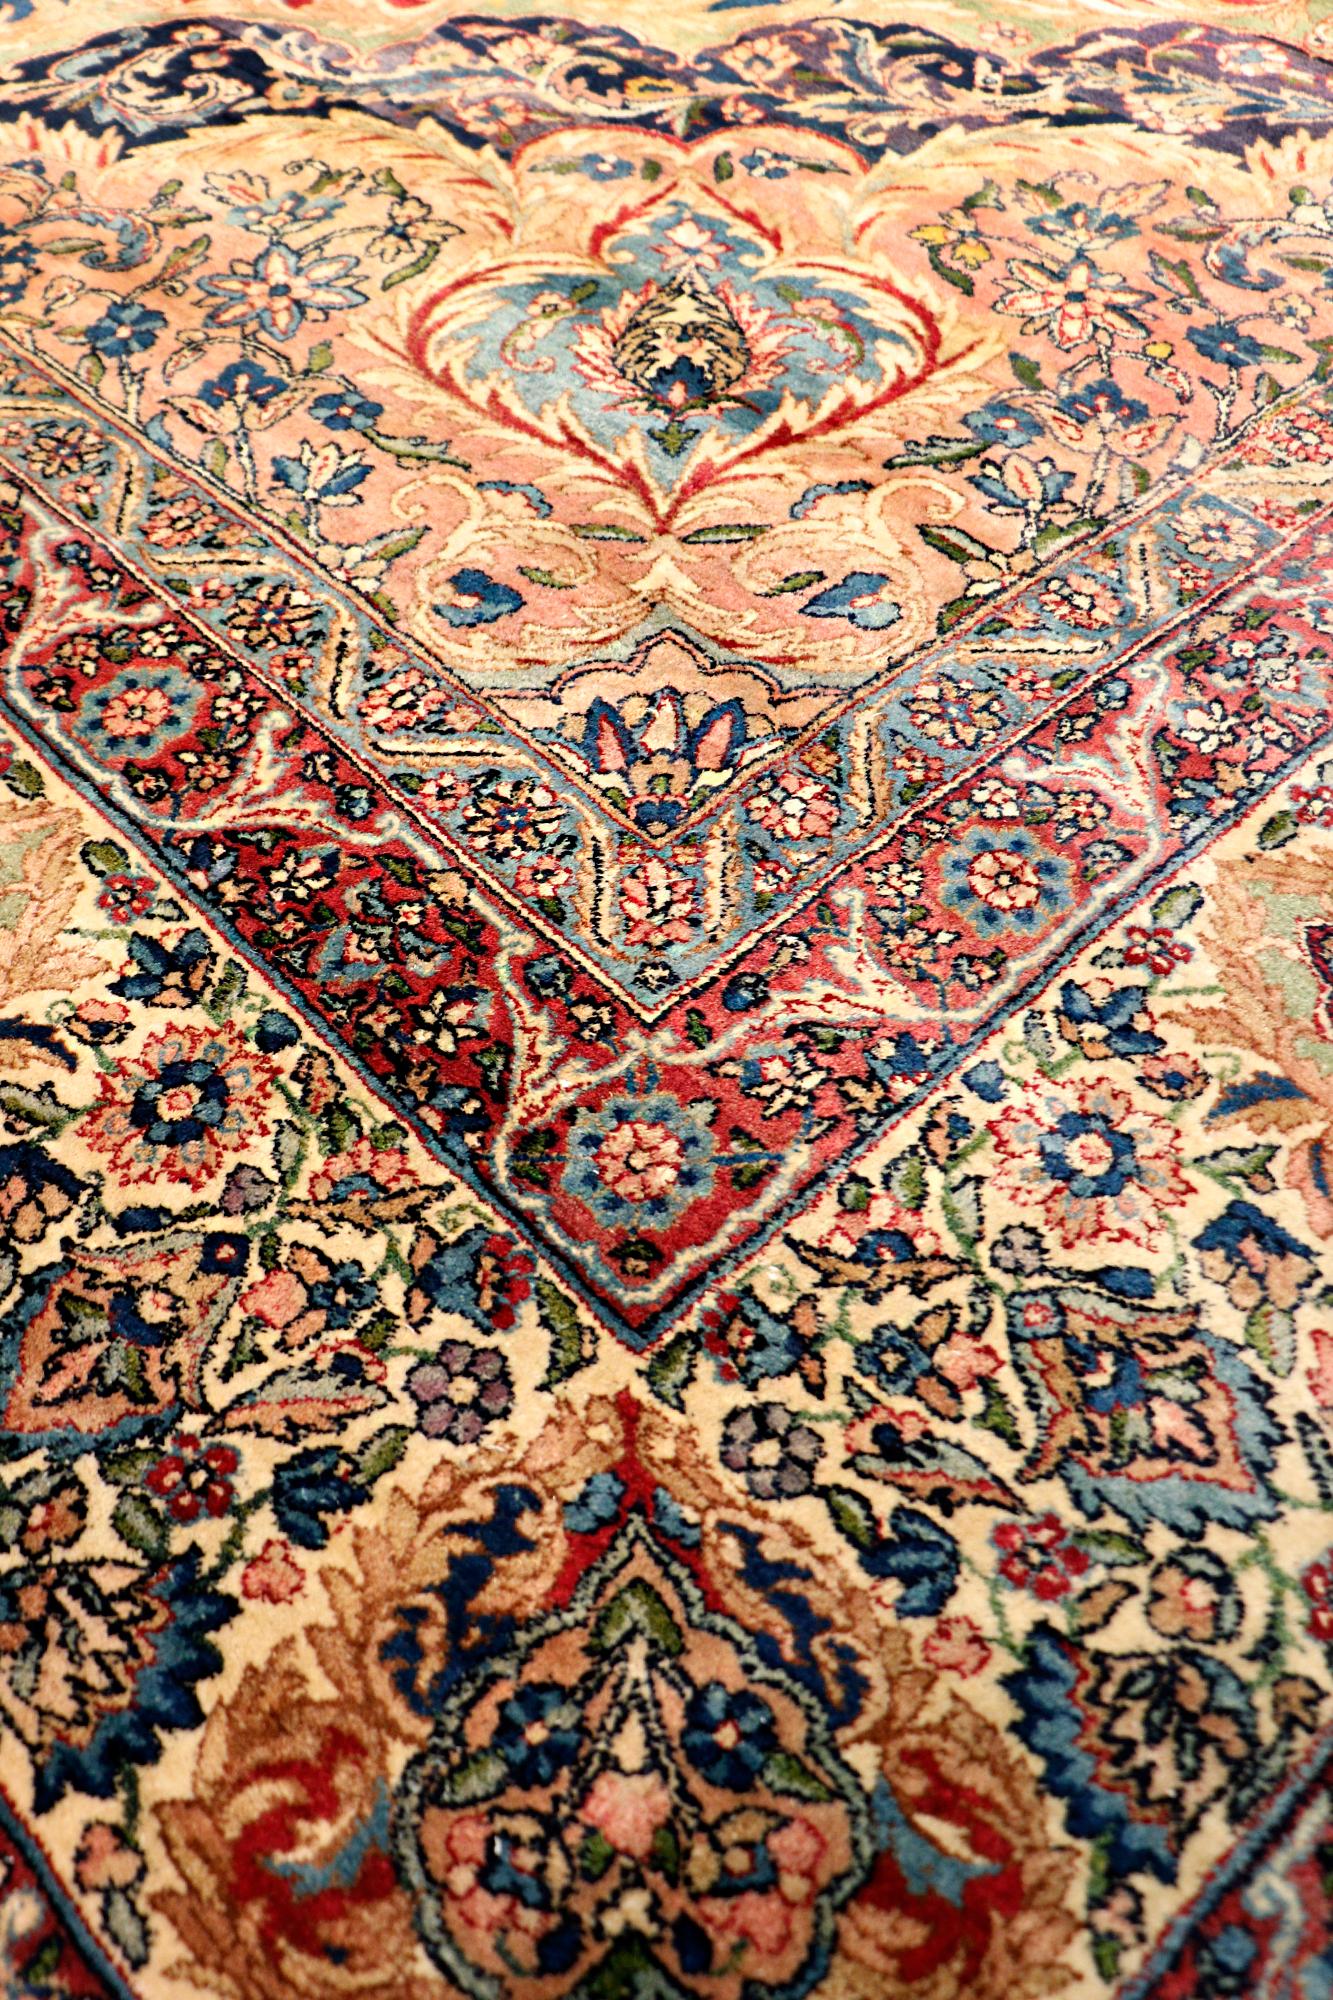 Breathtaking and quite rare Antique Persian Lavar rug, country of origin / rug type: Persian rug, circa date: 1910. Size: 11 ft 5 in x 21 ft 6 in